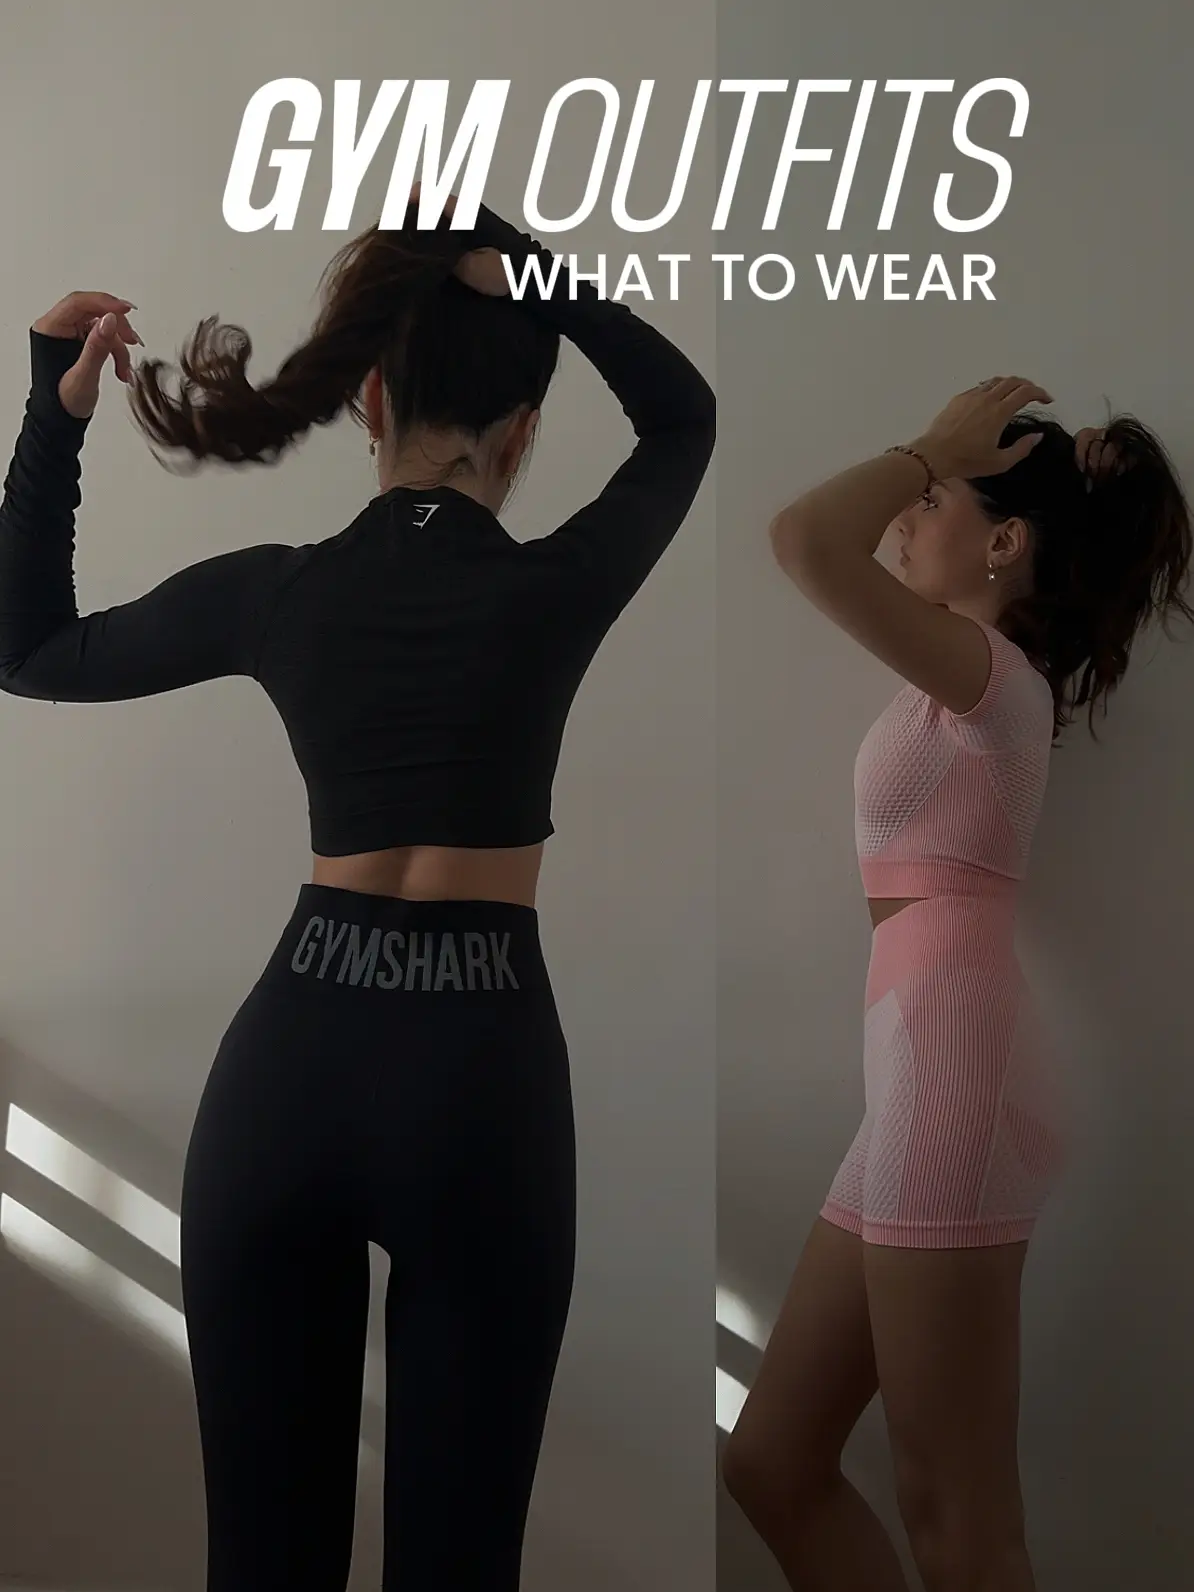 Gymshark, Gym Outfits